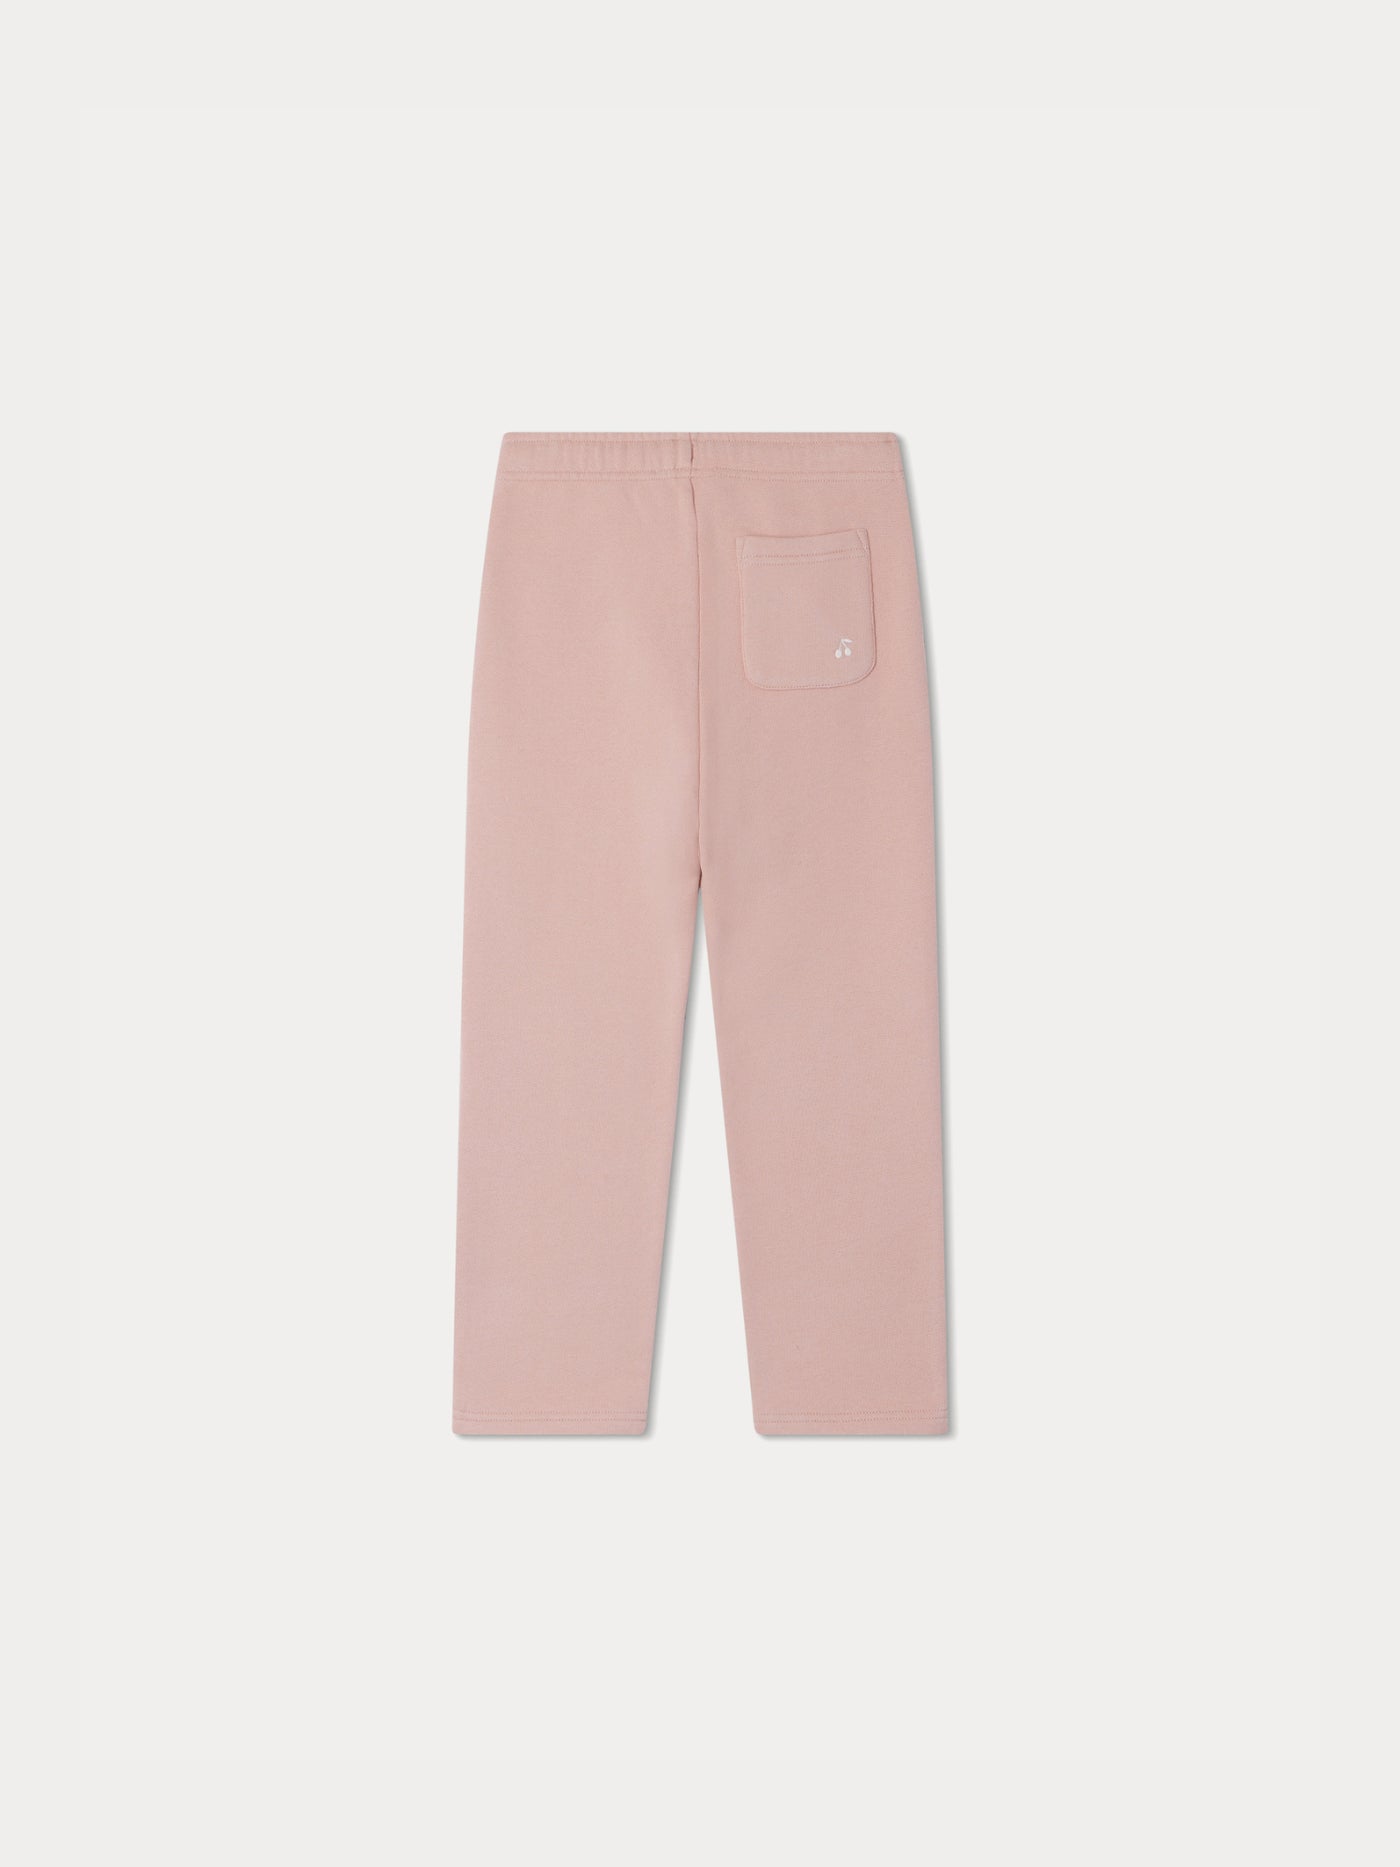 Solid-Colored Dalila Sweatpants faded pink